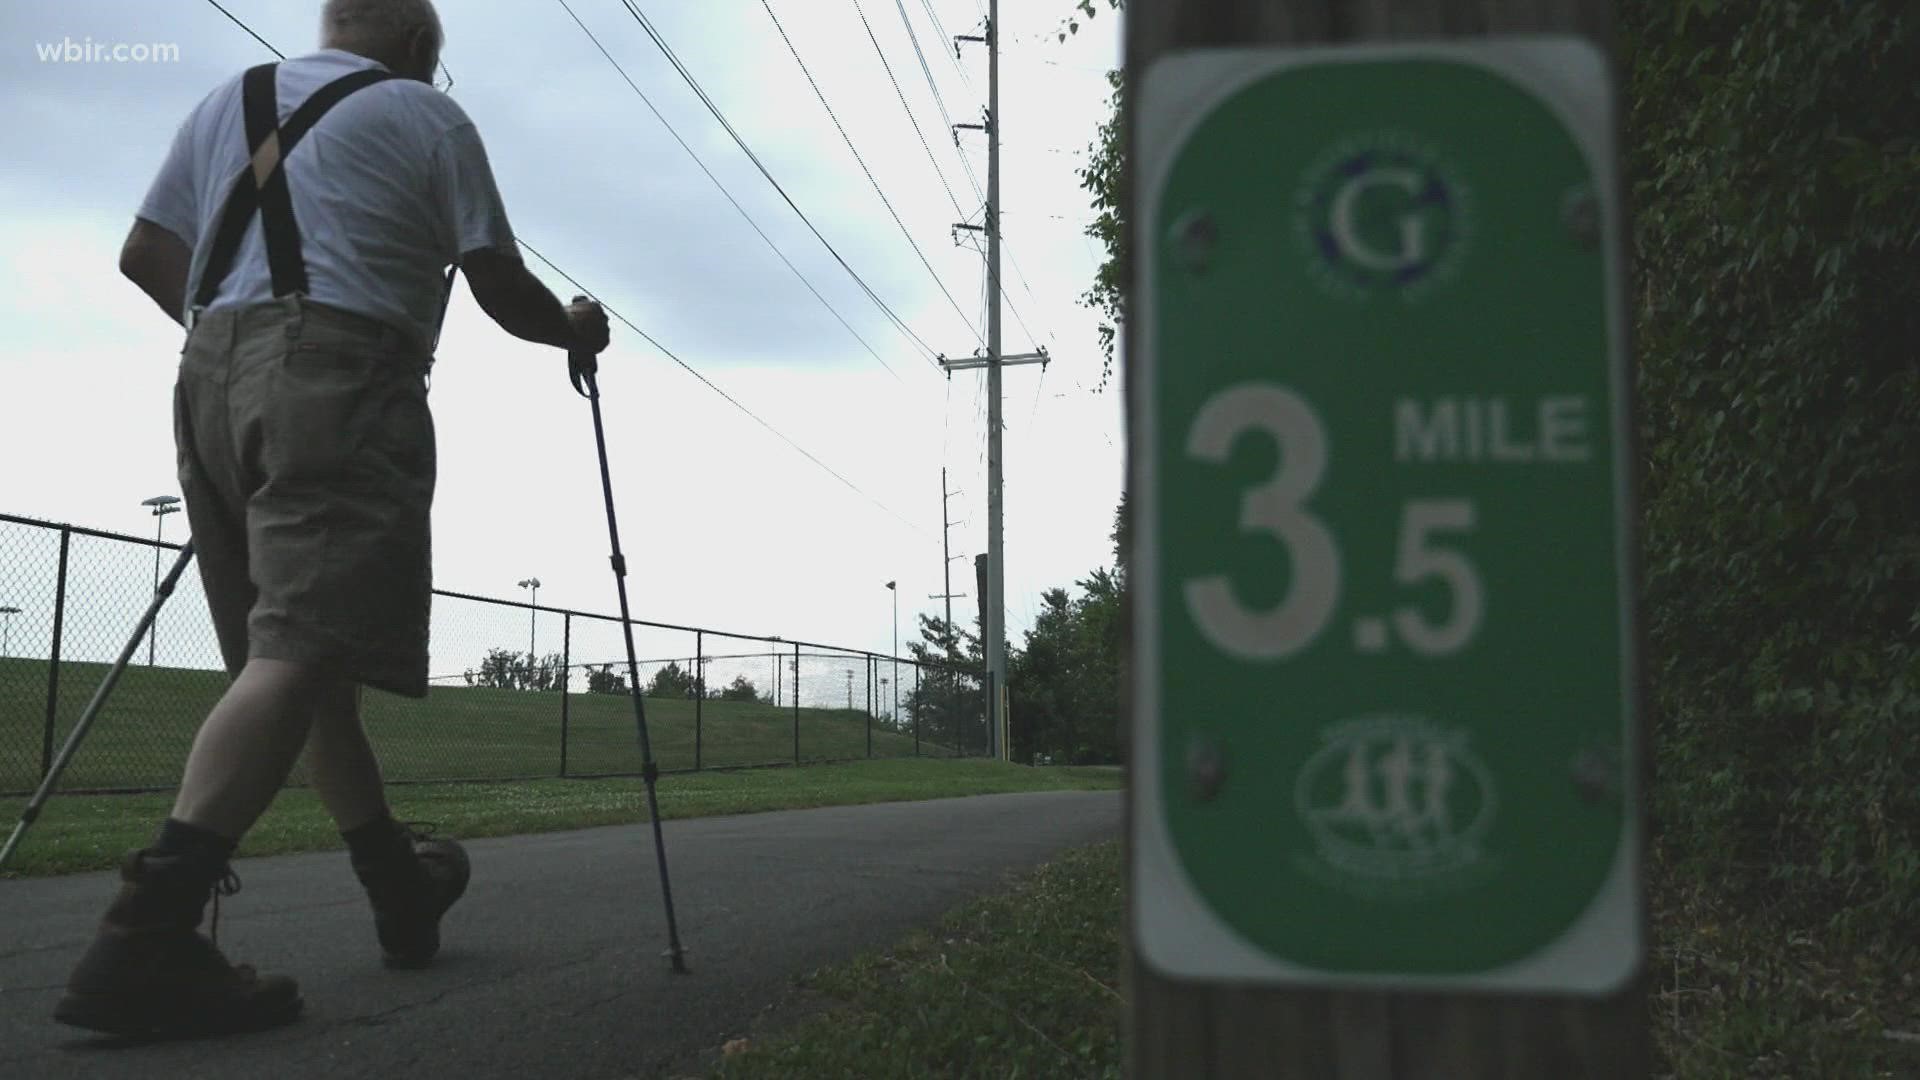 Four miles a day — everyday.  A 73-year-old former Navy firefighter is blazing new miles daily on a Knoxville greenway.